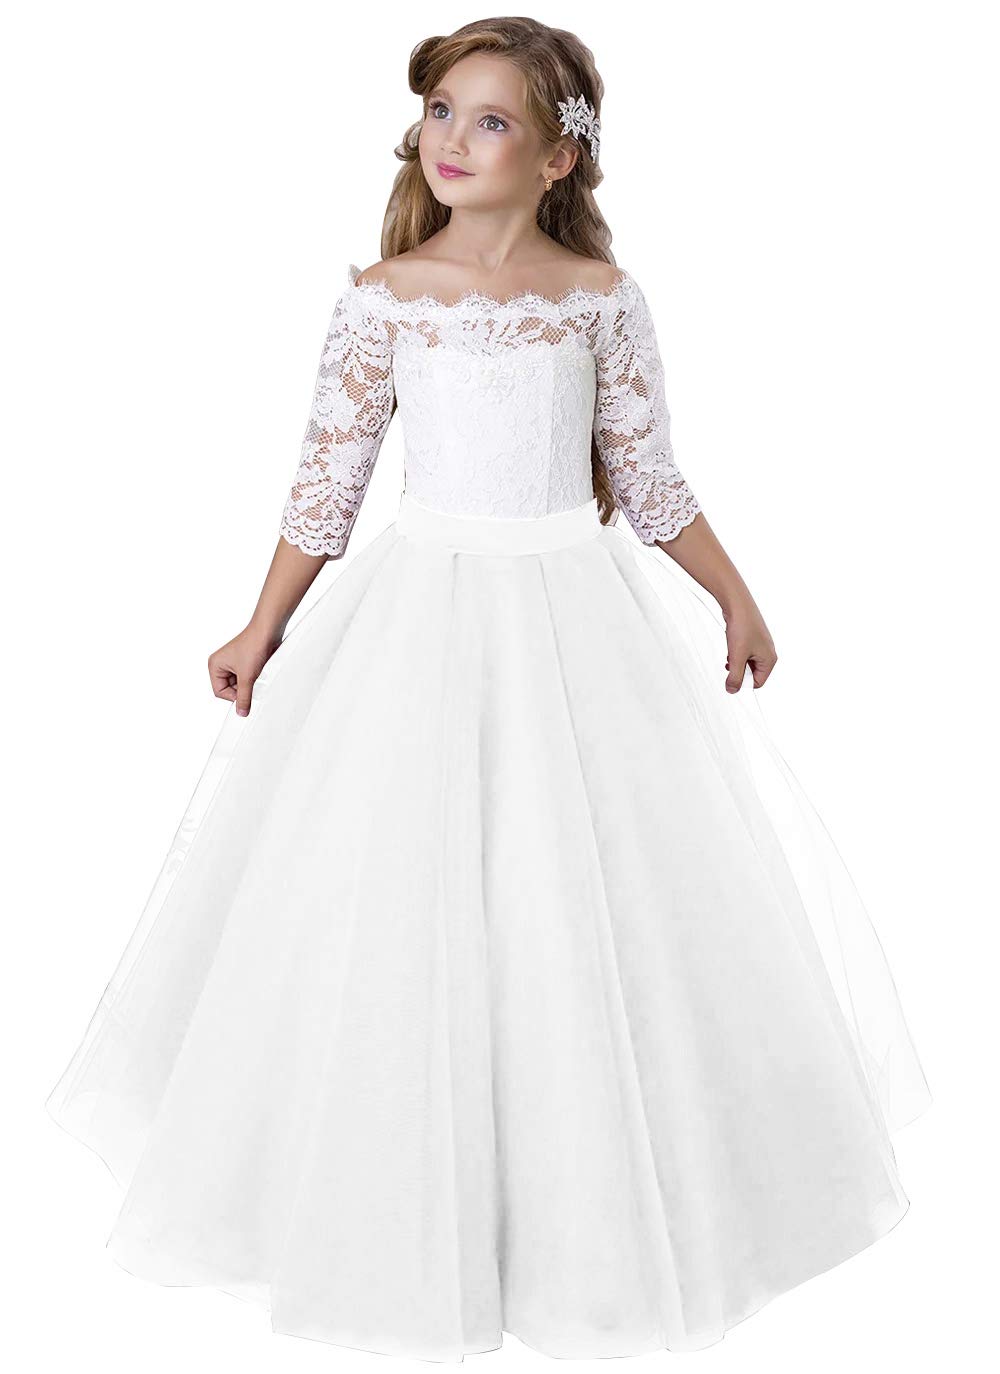 Flower Girl Dress Long Sleeve Kids Lace Pageant Party Christmas Ball Gown Dresses Multi-colors